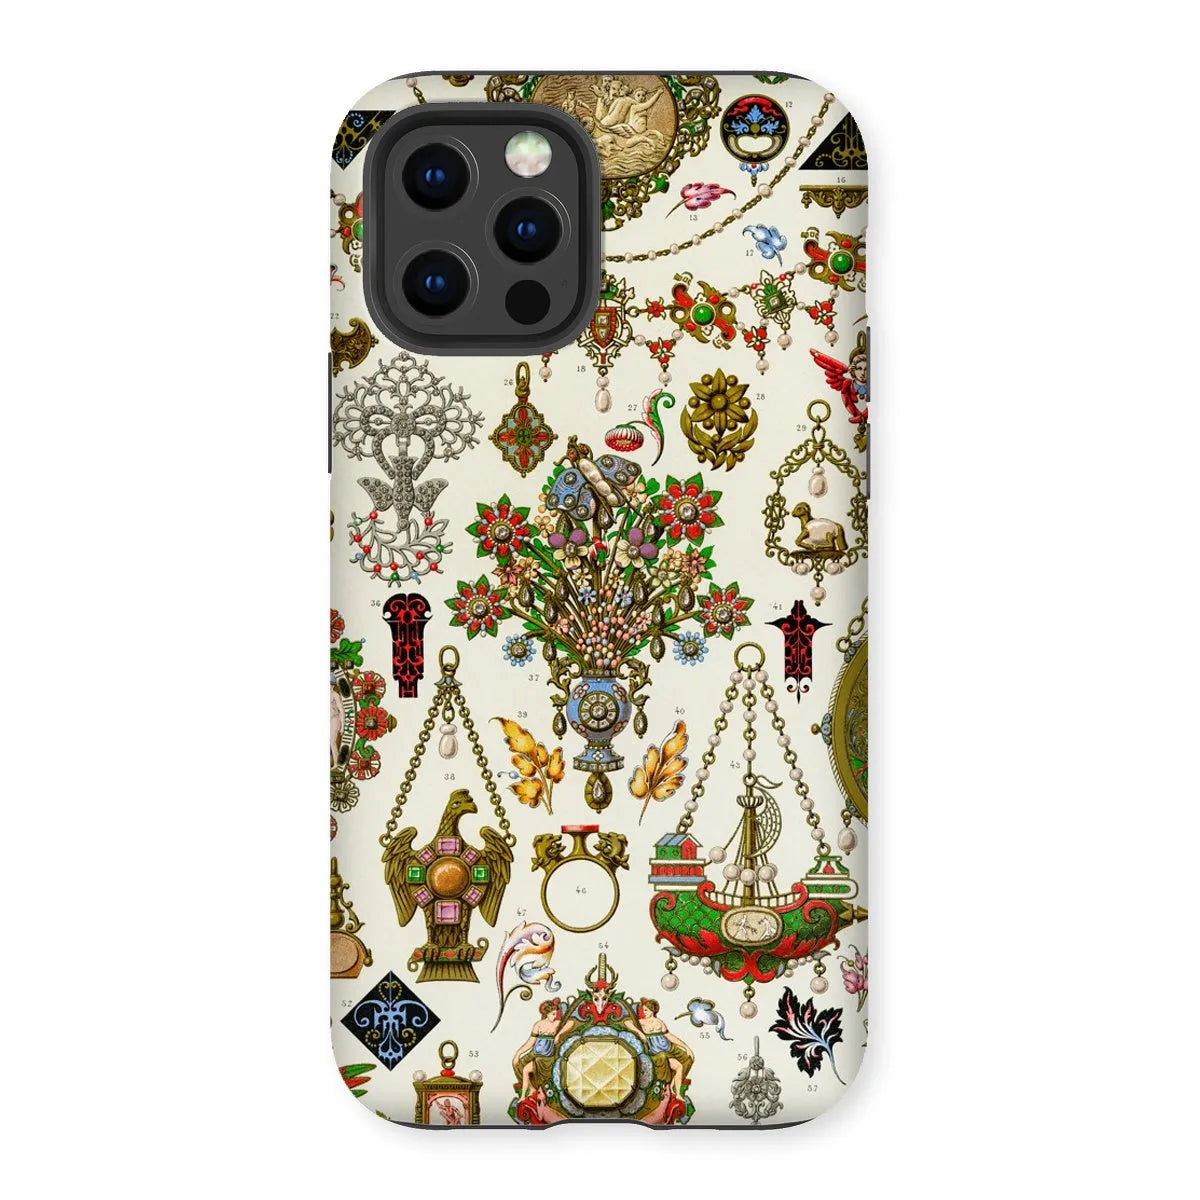 French Jewelry By Auguste Racinet Tough Phone Case - Iphone 12 Pro / Matte - Mobile Phone Cases - Aesthetic Art